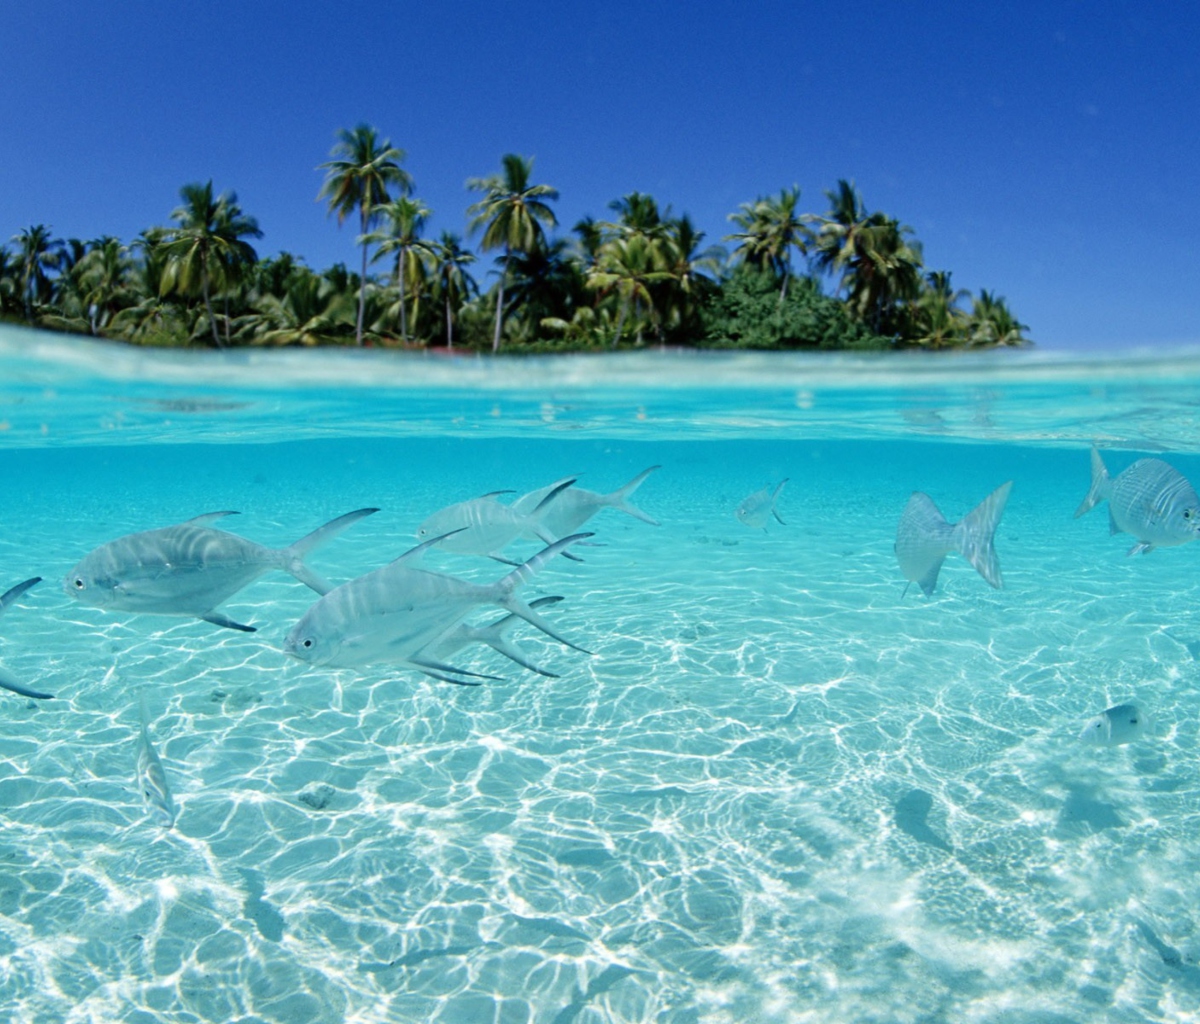 Tropical Island And Fish In Blue Sea wallpaper 1200x1024